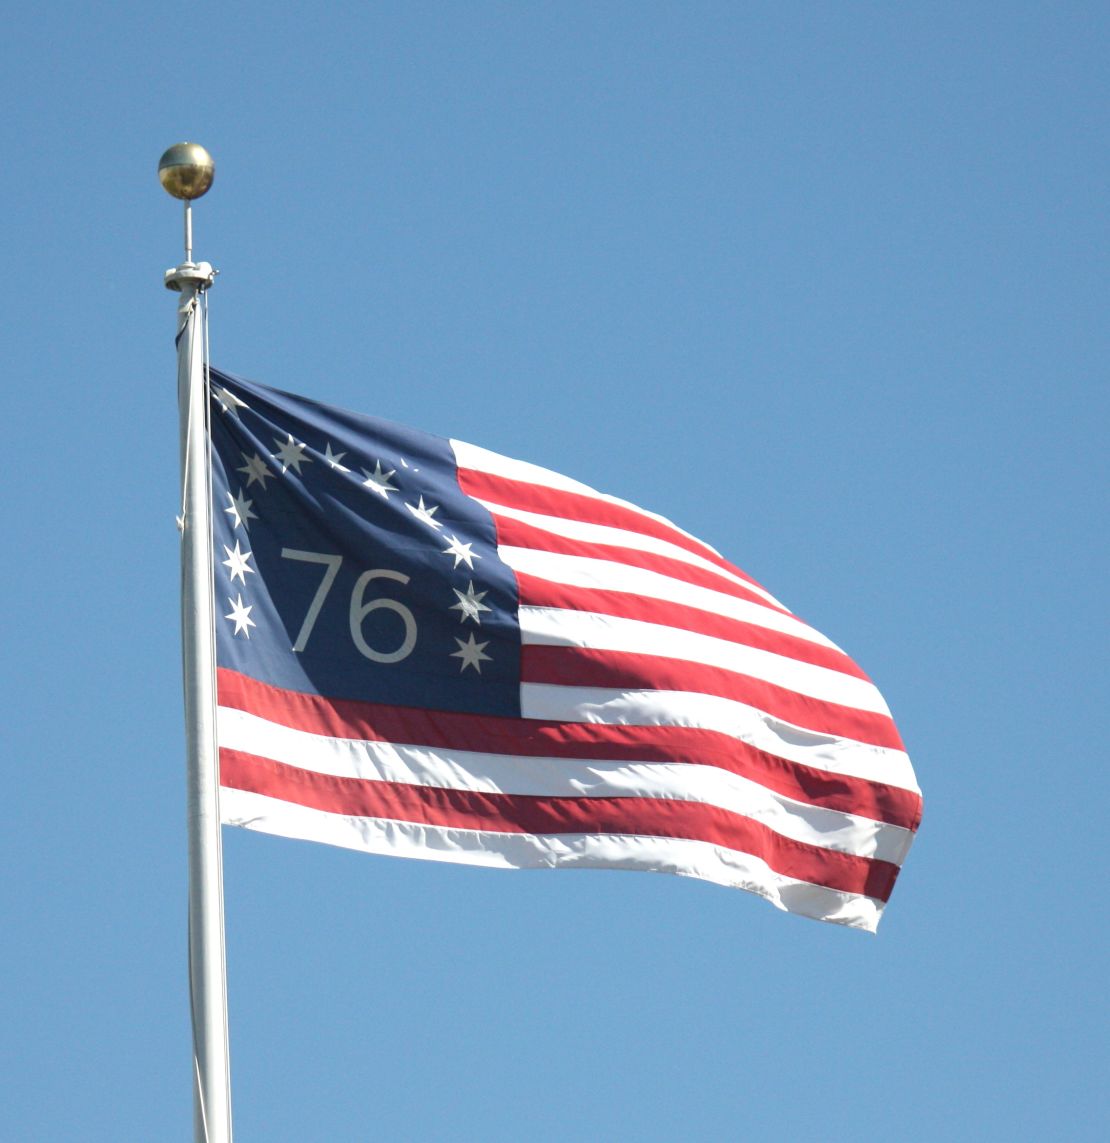 The Bennington flag was flown in the Battle of Bennington in 1777 by Nathaniel Fillmore, grandfather of President Millard Fillmore. Some dispute that this actual flag was flown at the battle, or that Fillmore actually flew it, but it remains a popular design today.